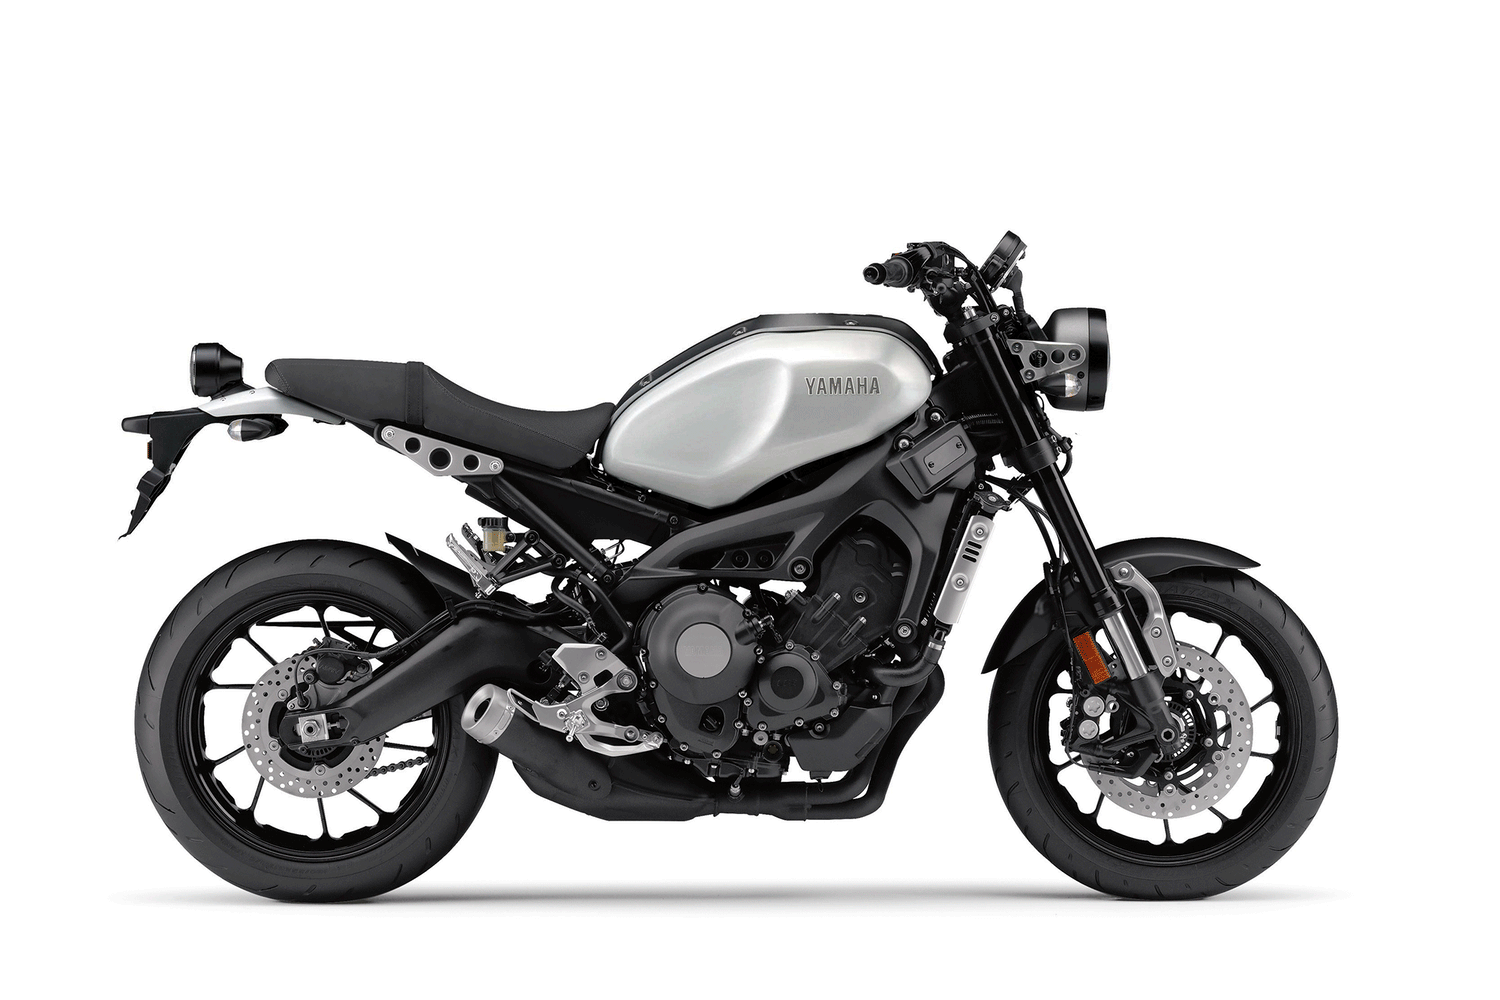 Change the look of your yamah xsr900 in 30 minutes